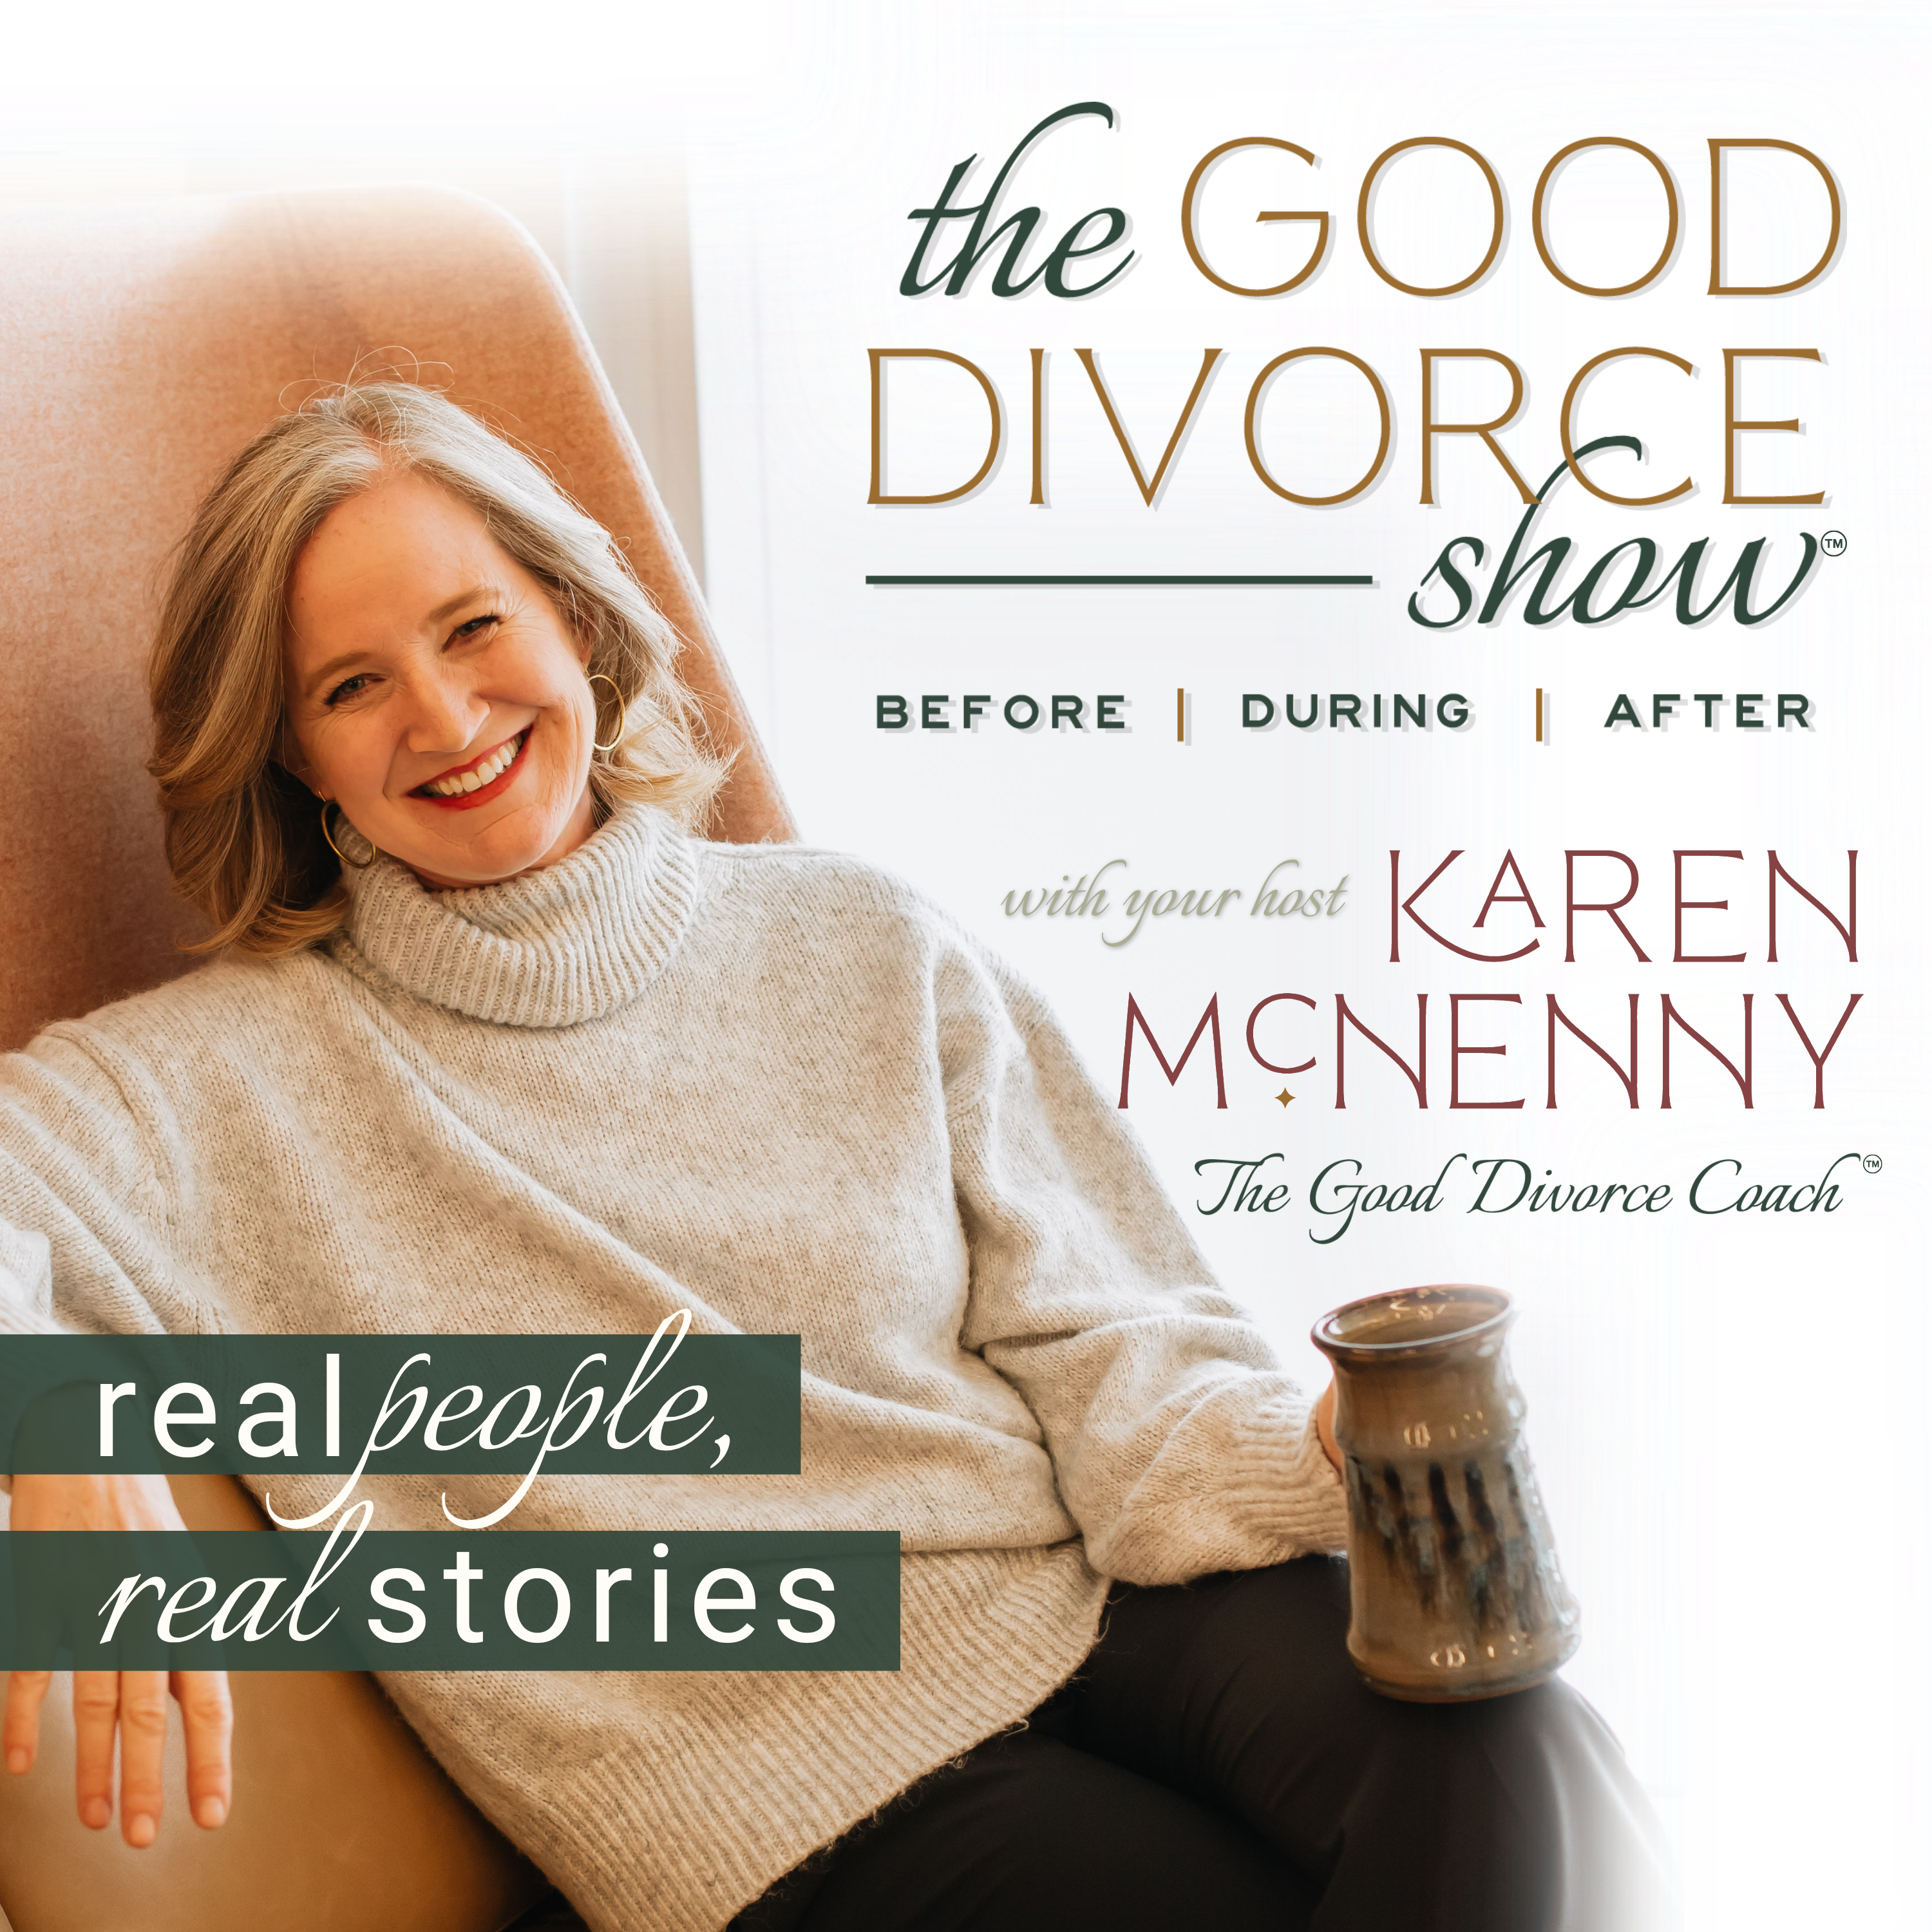 The Good Divorce Show - Real People, Real Stories